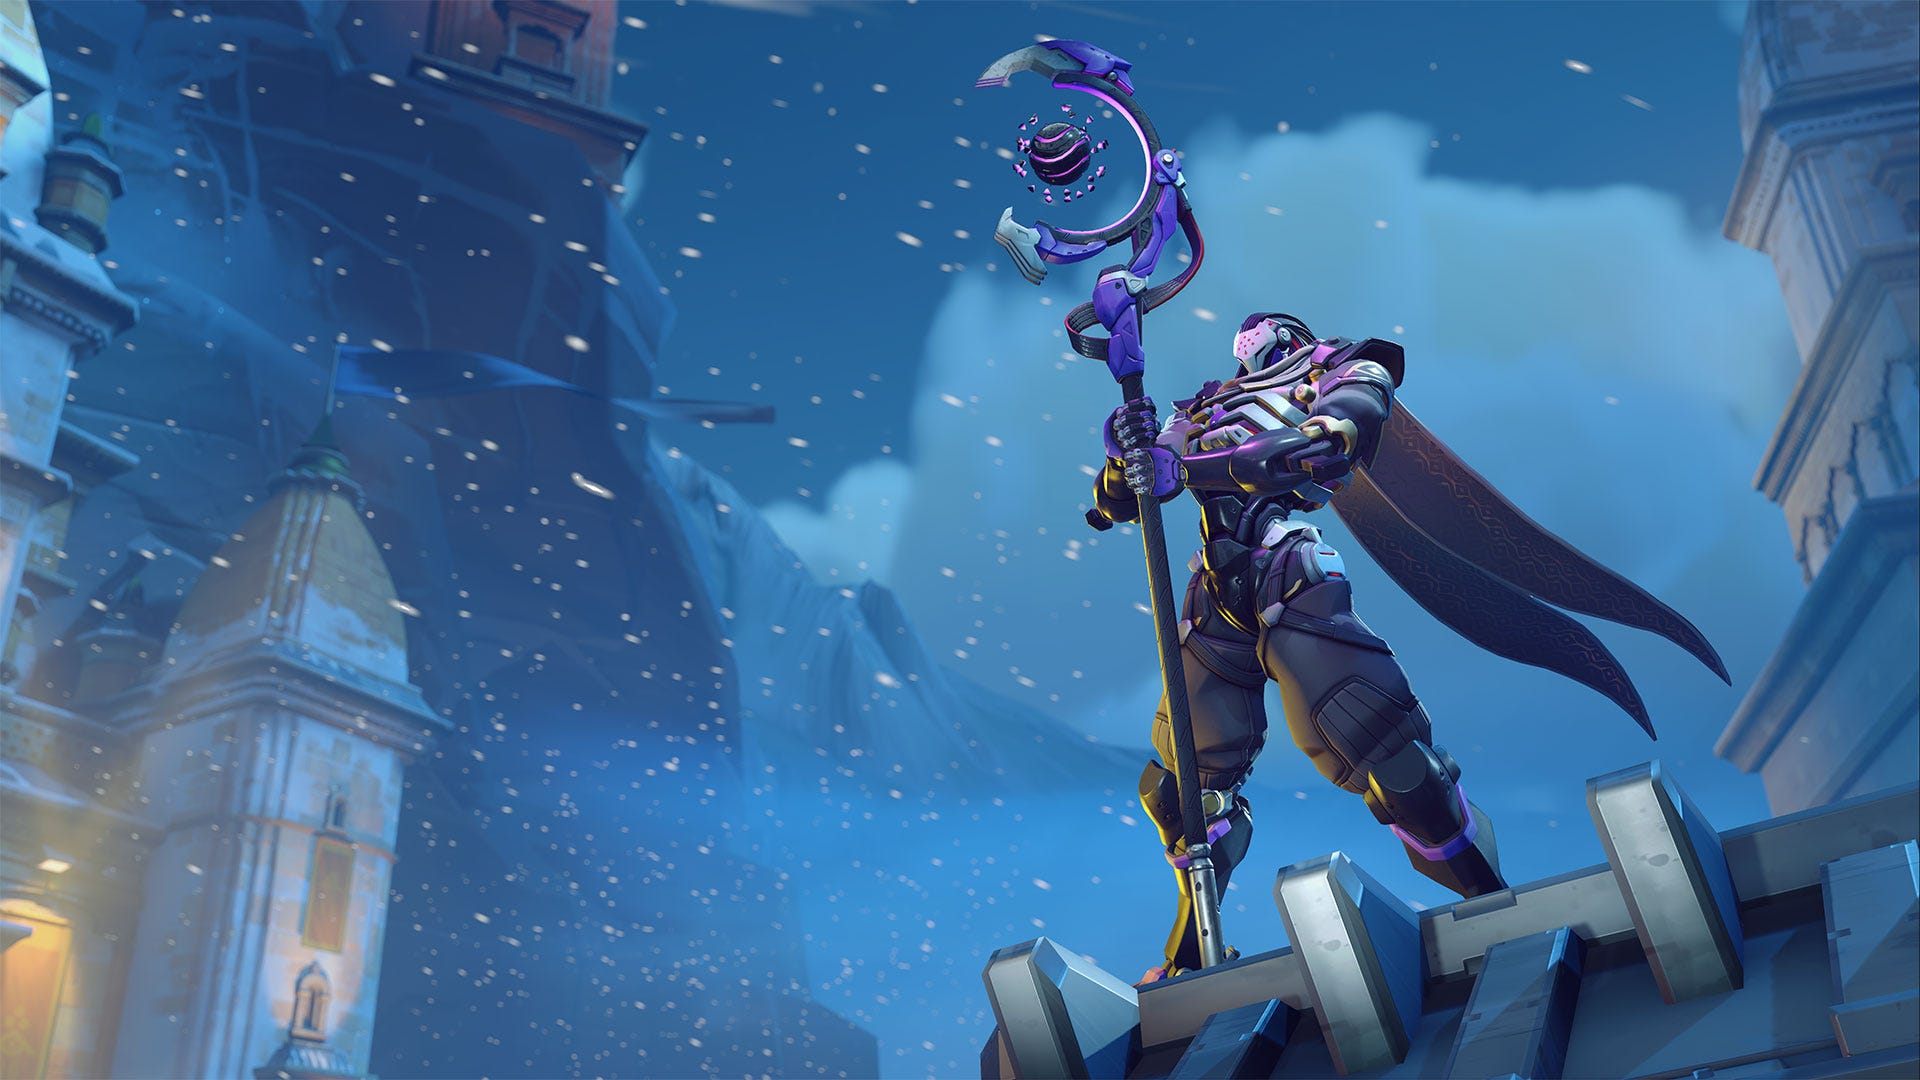 Ramattra from Overwatch 2 posing with his staff in the snow